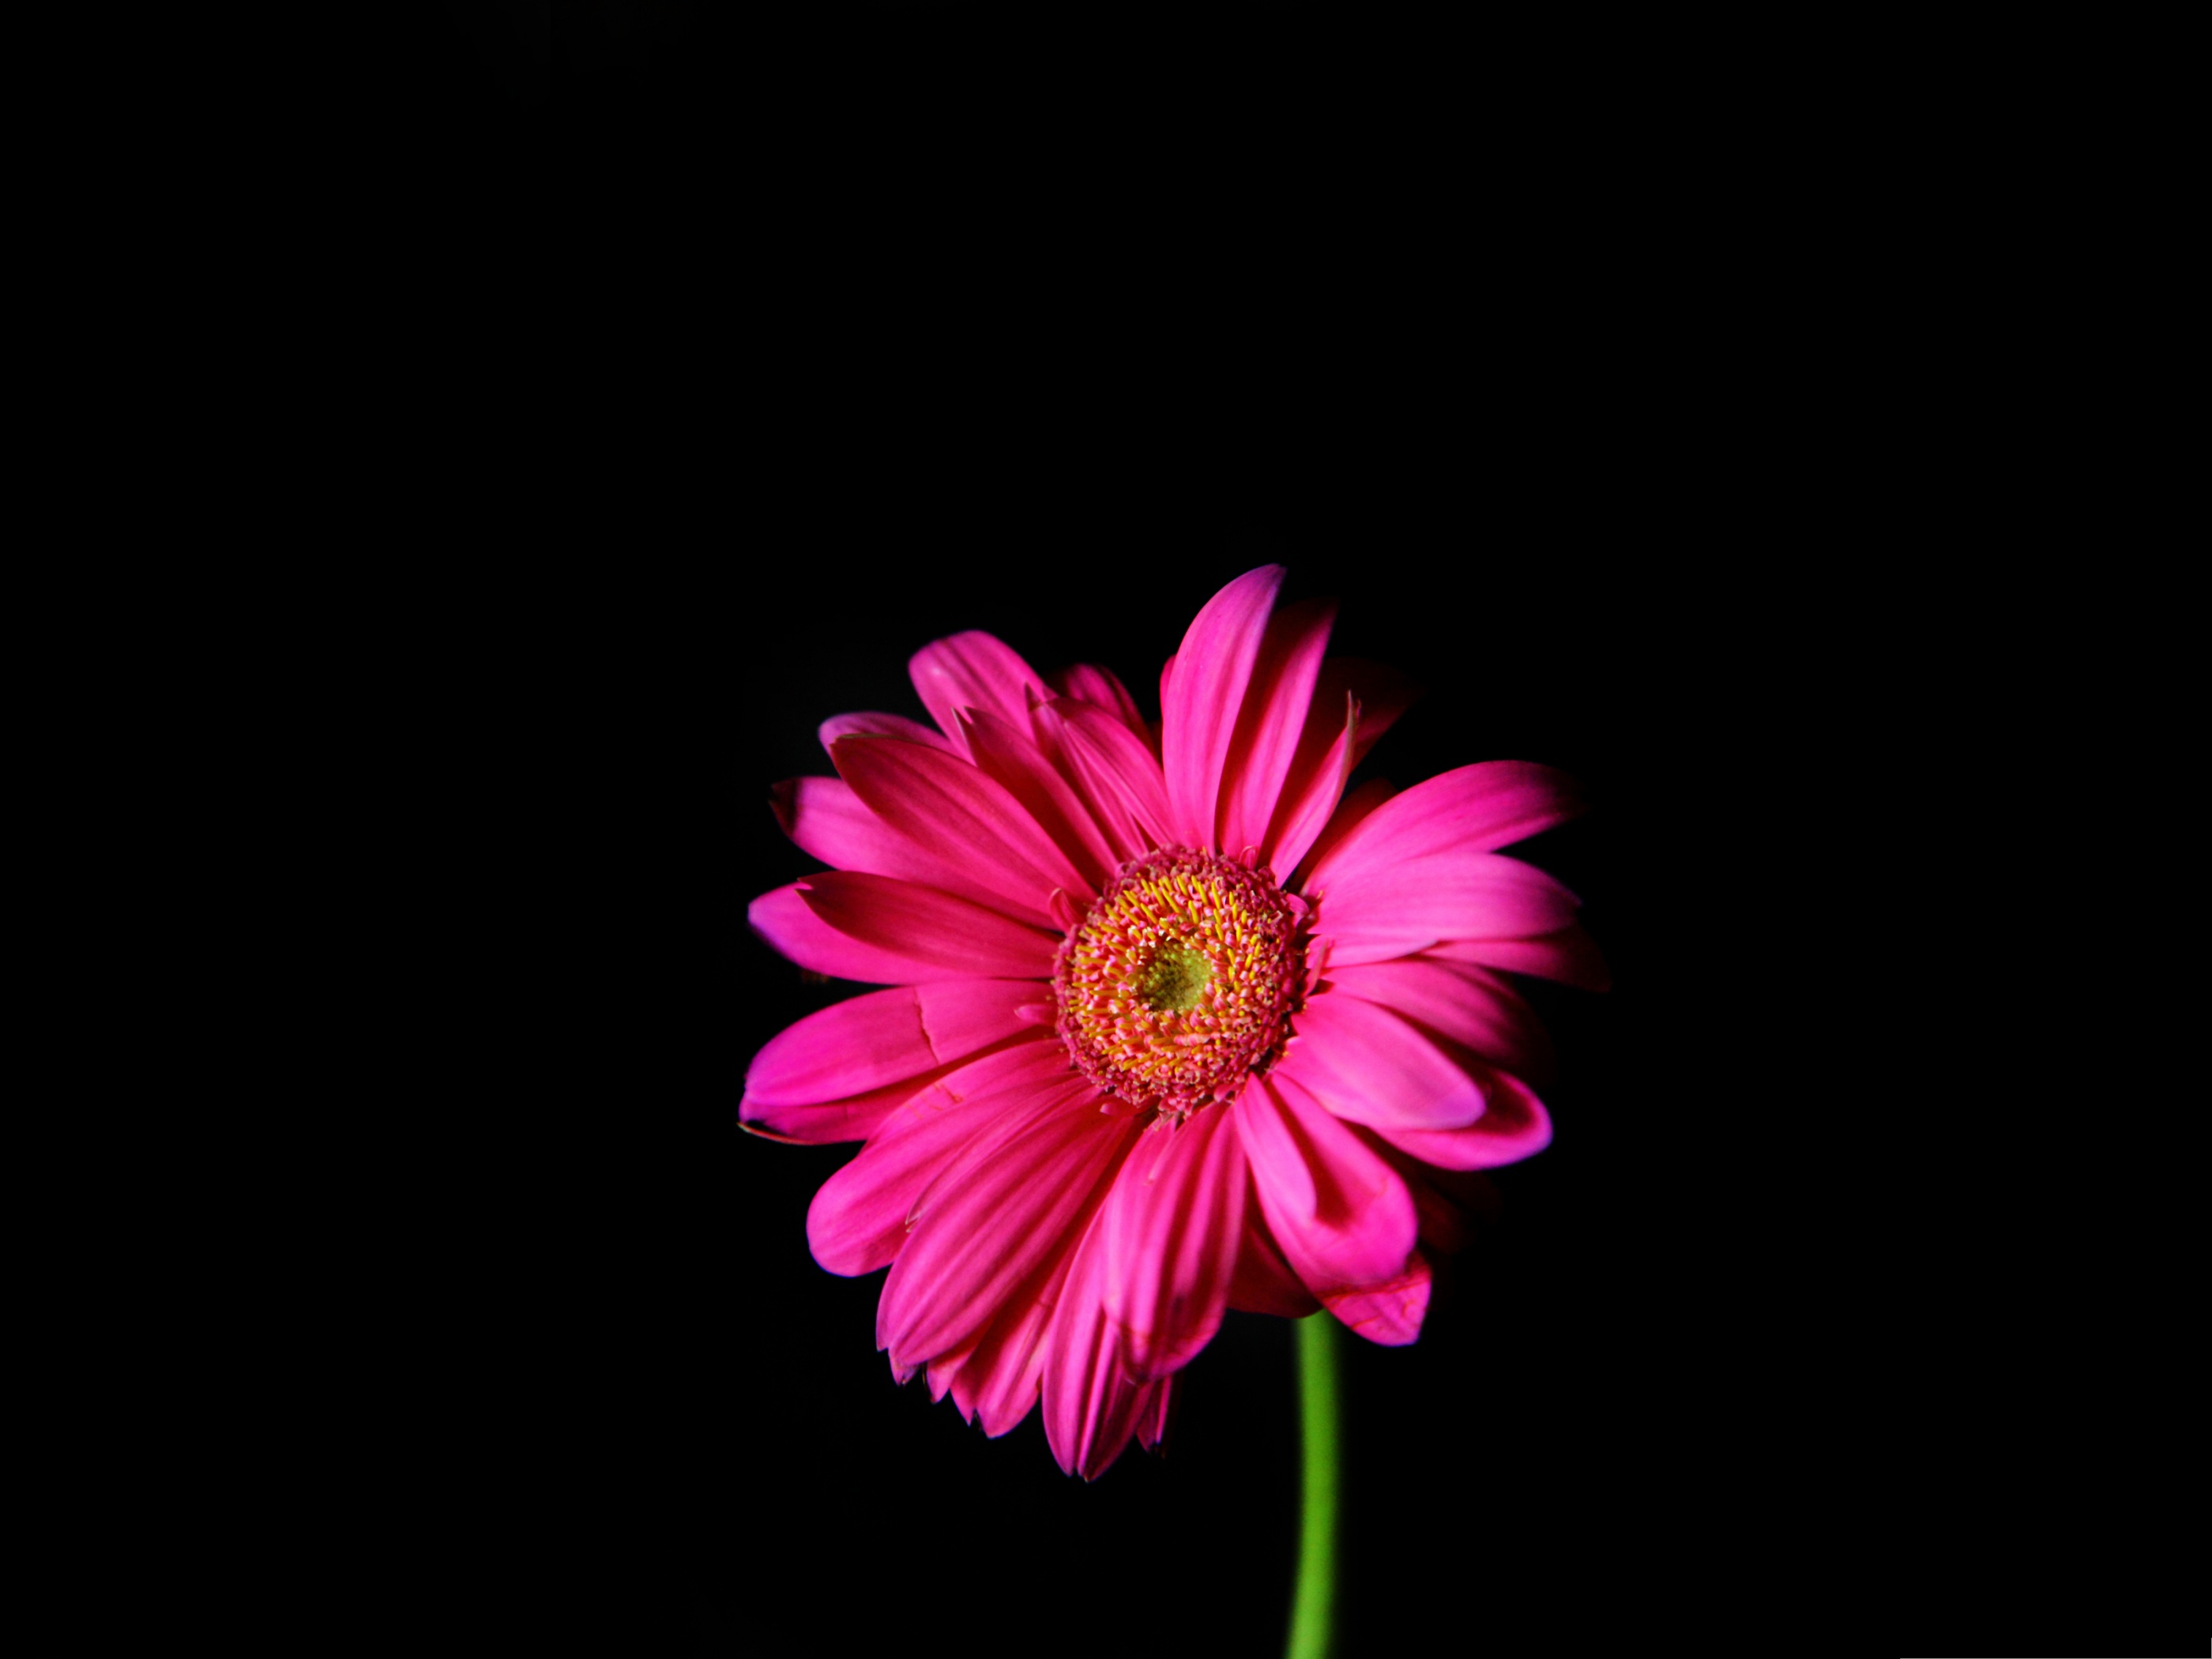 Wallpapers for Computer Free Hot Pink Gerber Daisy on Dark Background